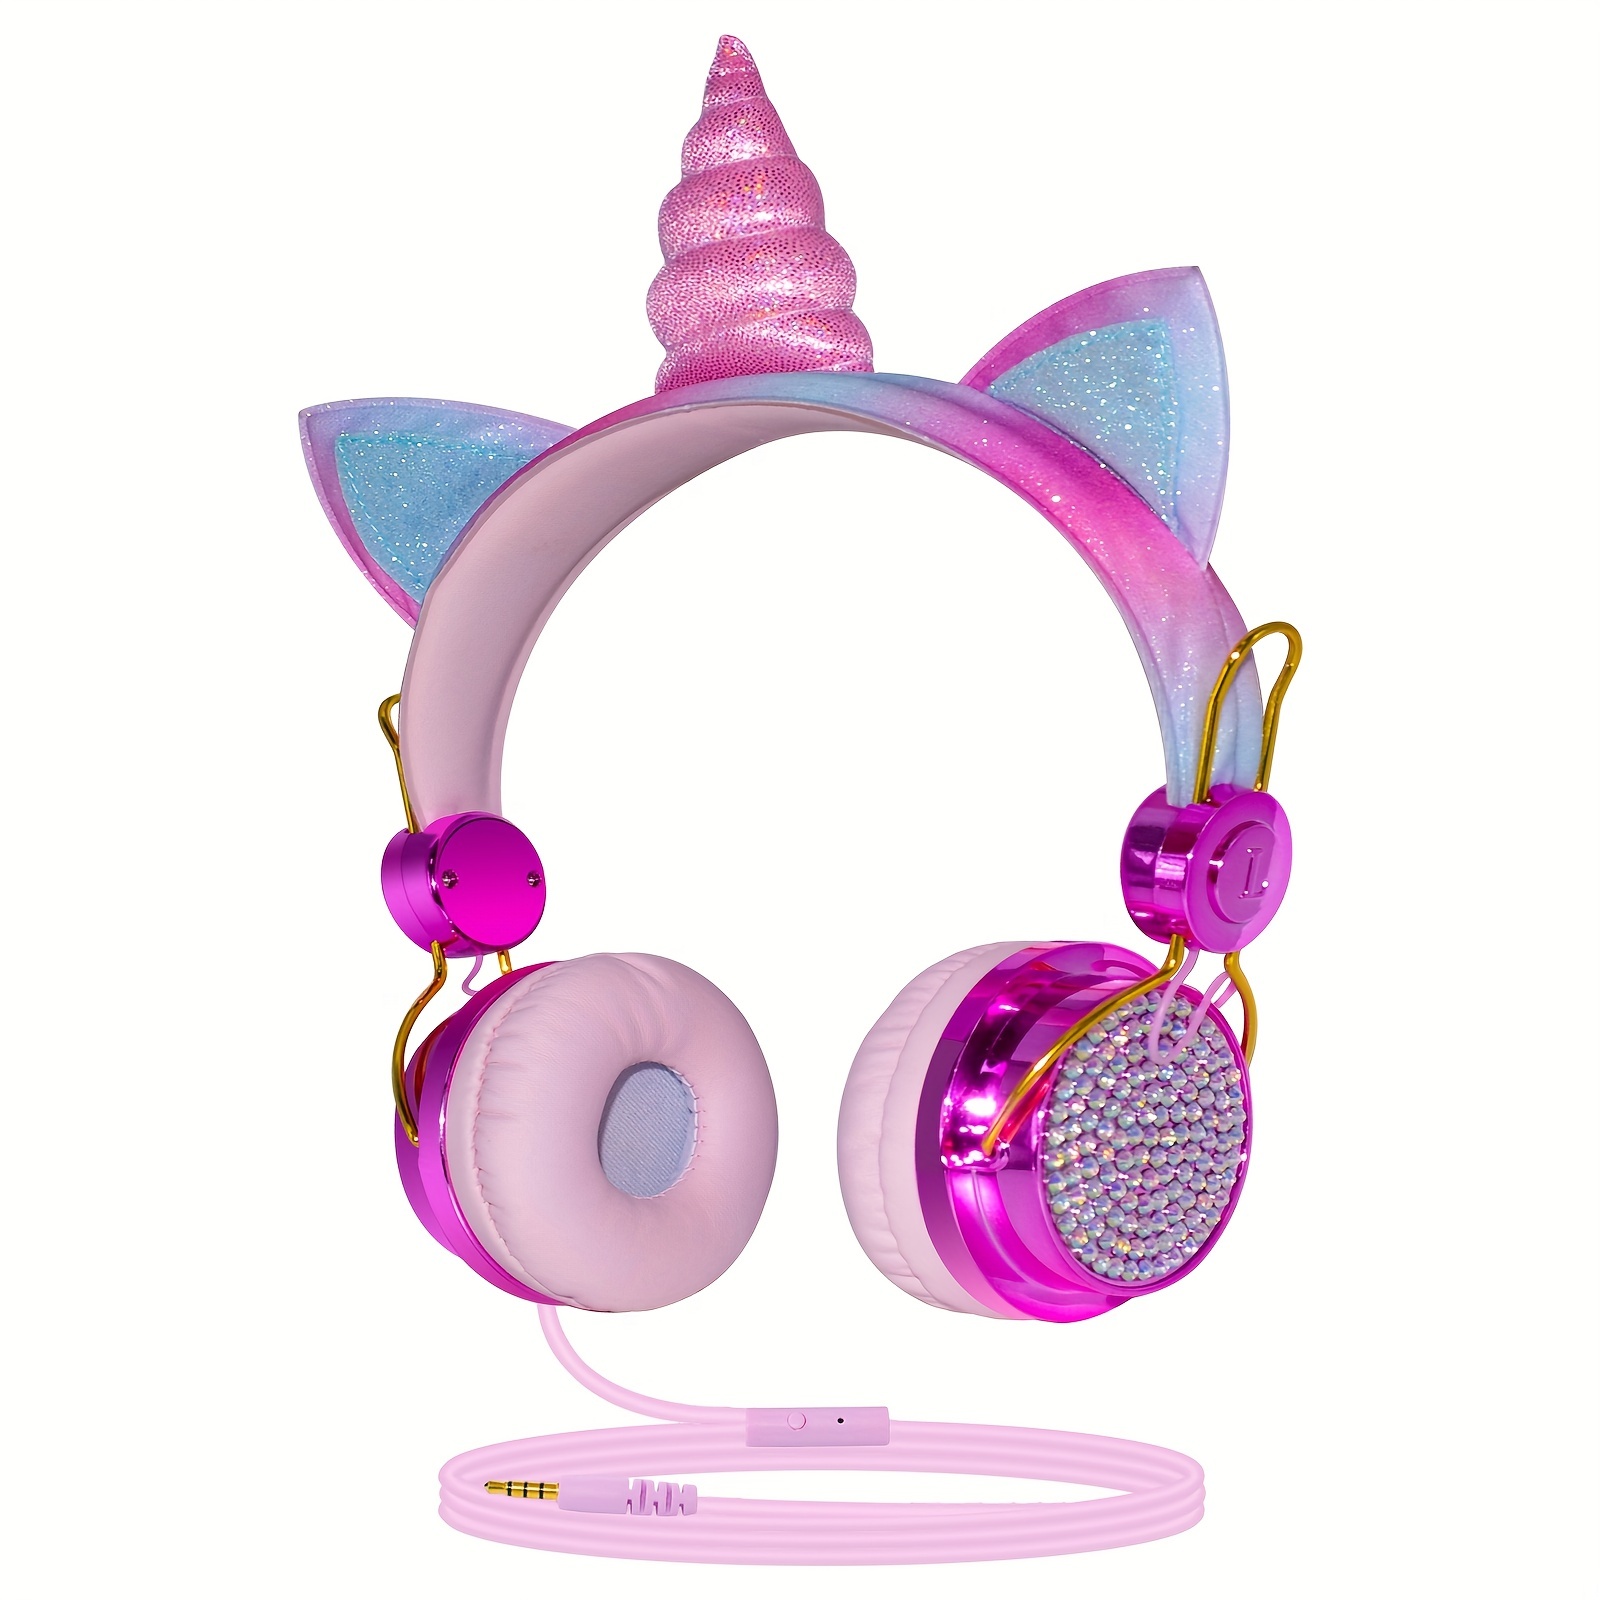 

Kids Headphones, Unicorn Headphones With 98db Volume Limited For Girls, 3.5mm Jack Over On Ear Girl Headphone With Microphone For School, Birthday, Xmas, Unicorn Gifts